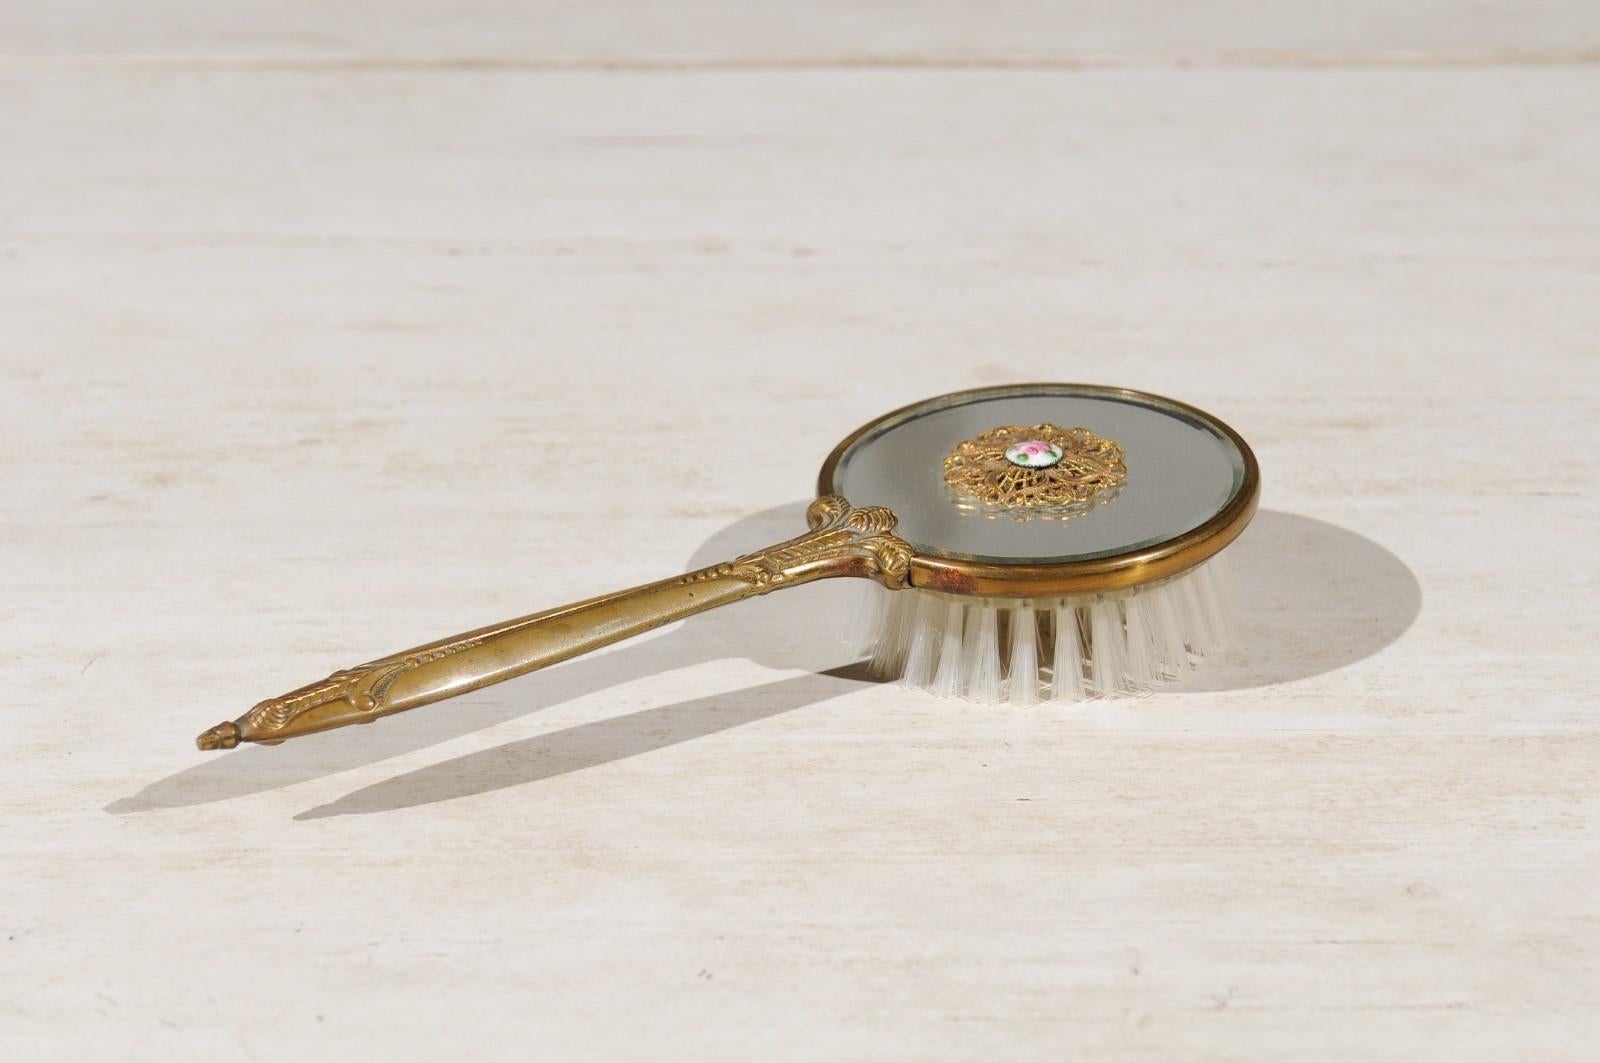 An English mirrored hair brush from the 20th century, with brass finish and filigree décor. Born in England during the 20th century, this exquisite hair brush features a circular body, mirrored on the top and accented with lovely volute motifs,